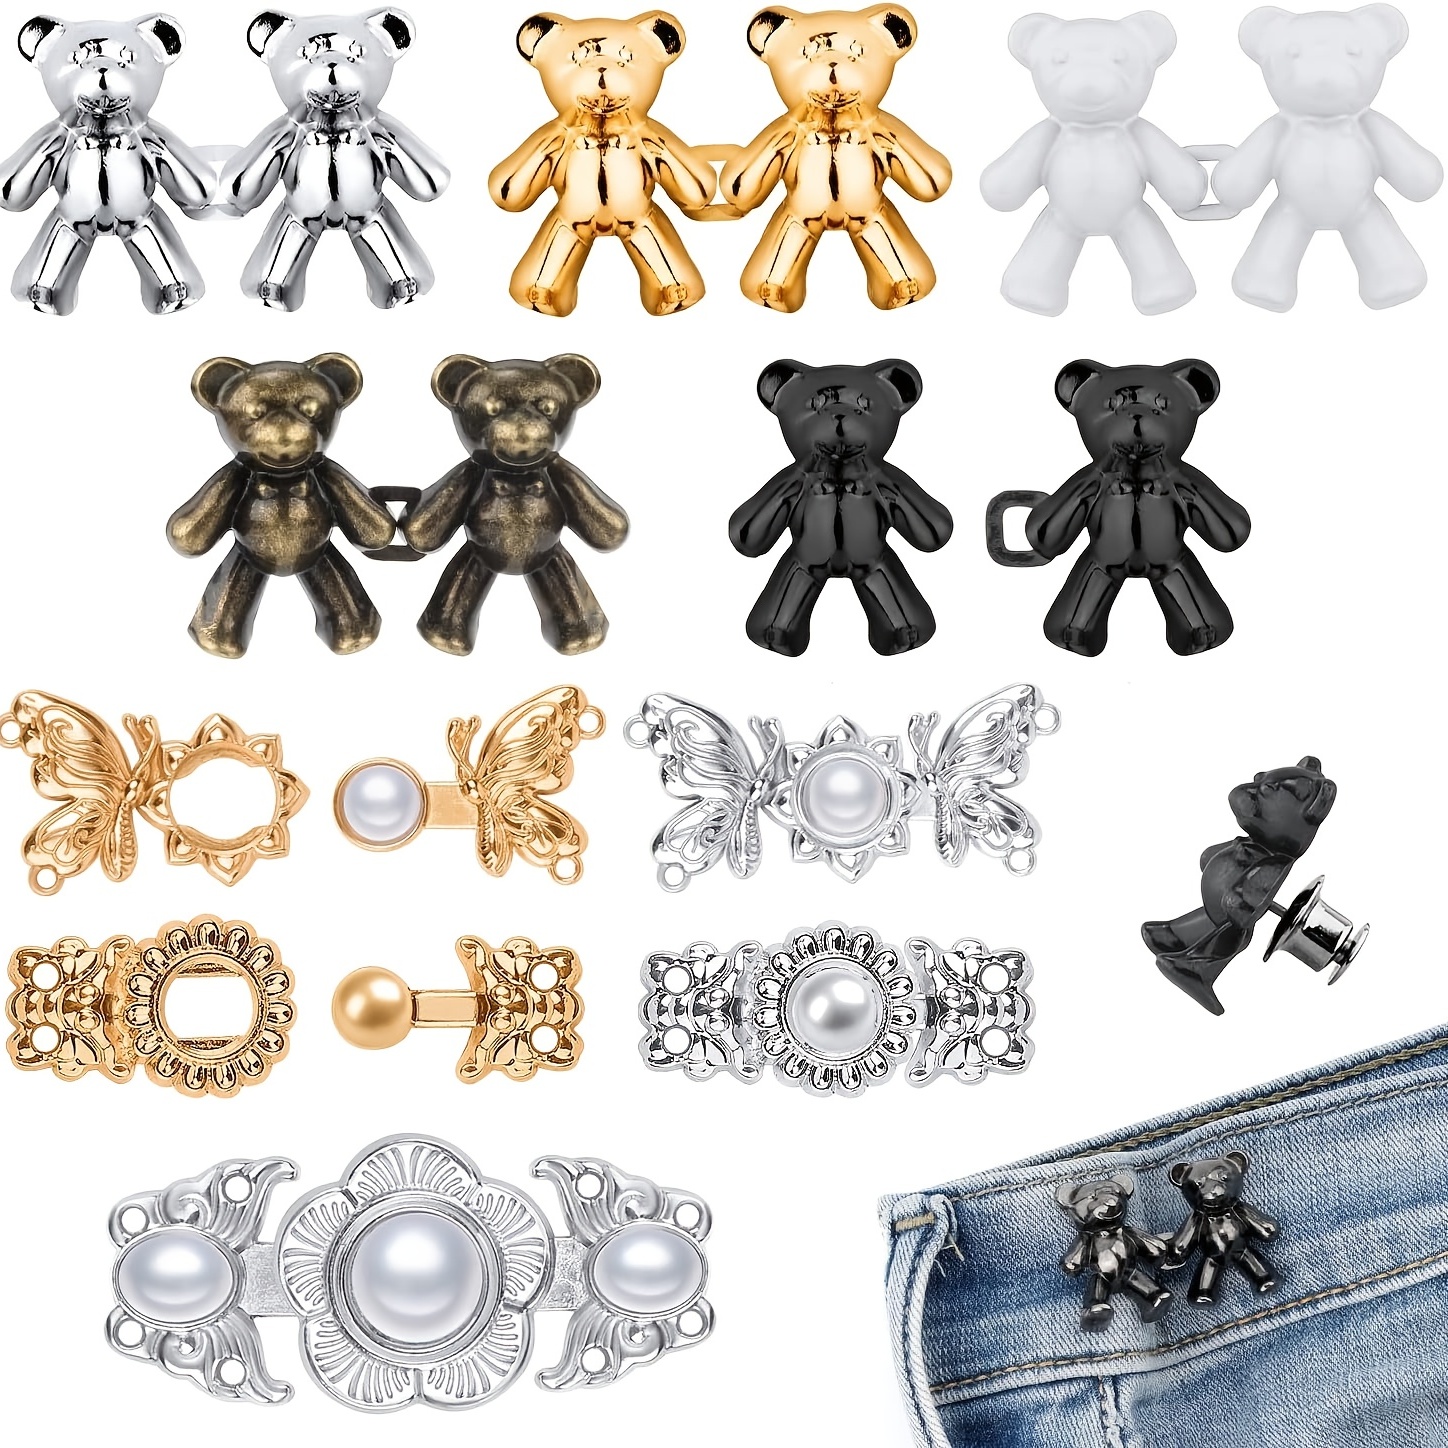 6/12 Pairs Cute Teddy Bear Clips for Pants, Metal Bear Jeans Buttons with  Small Box, Adjustable Teddy Bear Pants Clips for Waist Buckle (Small